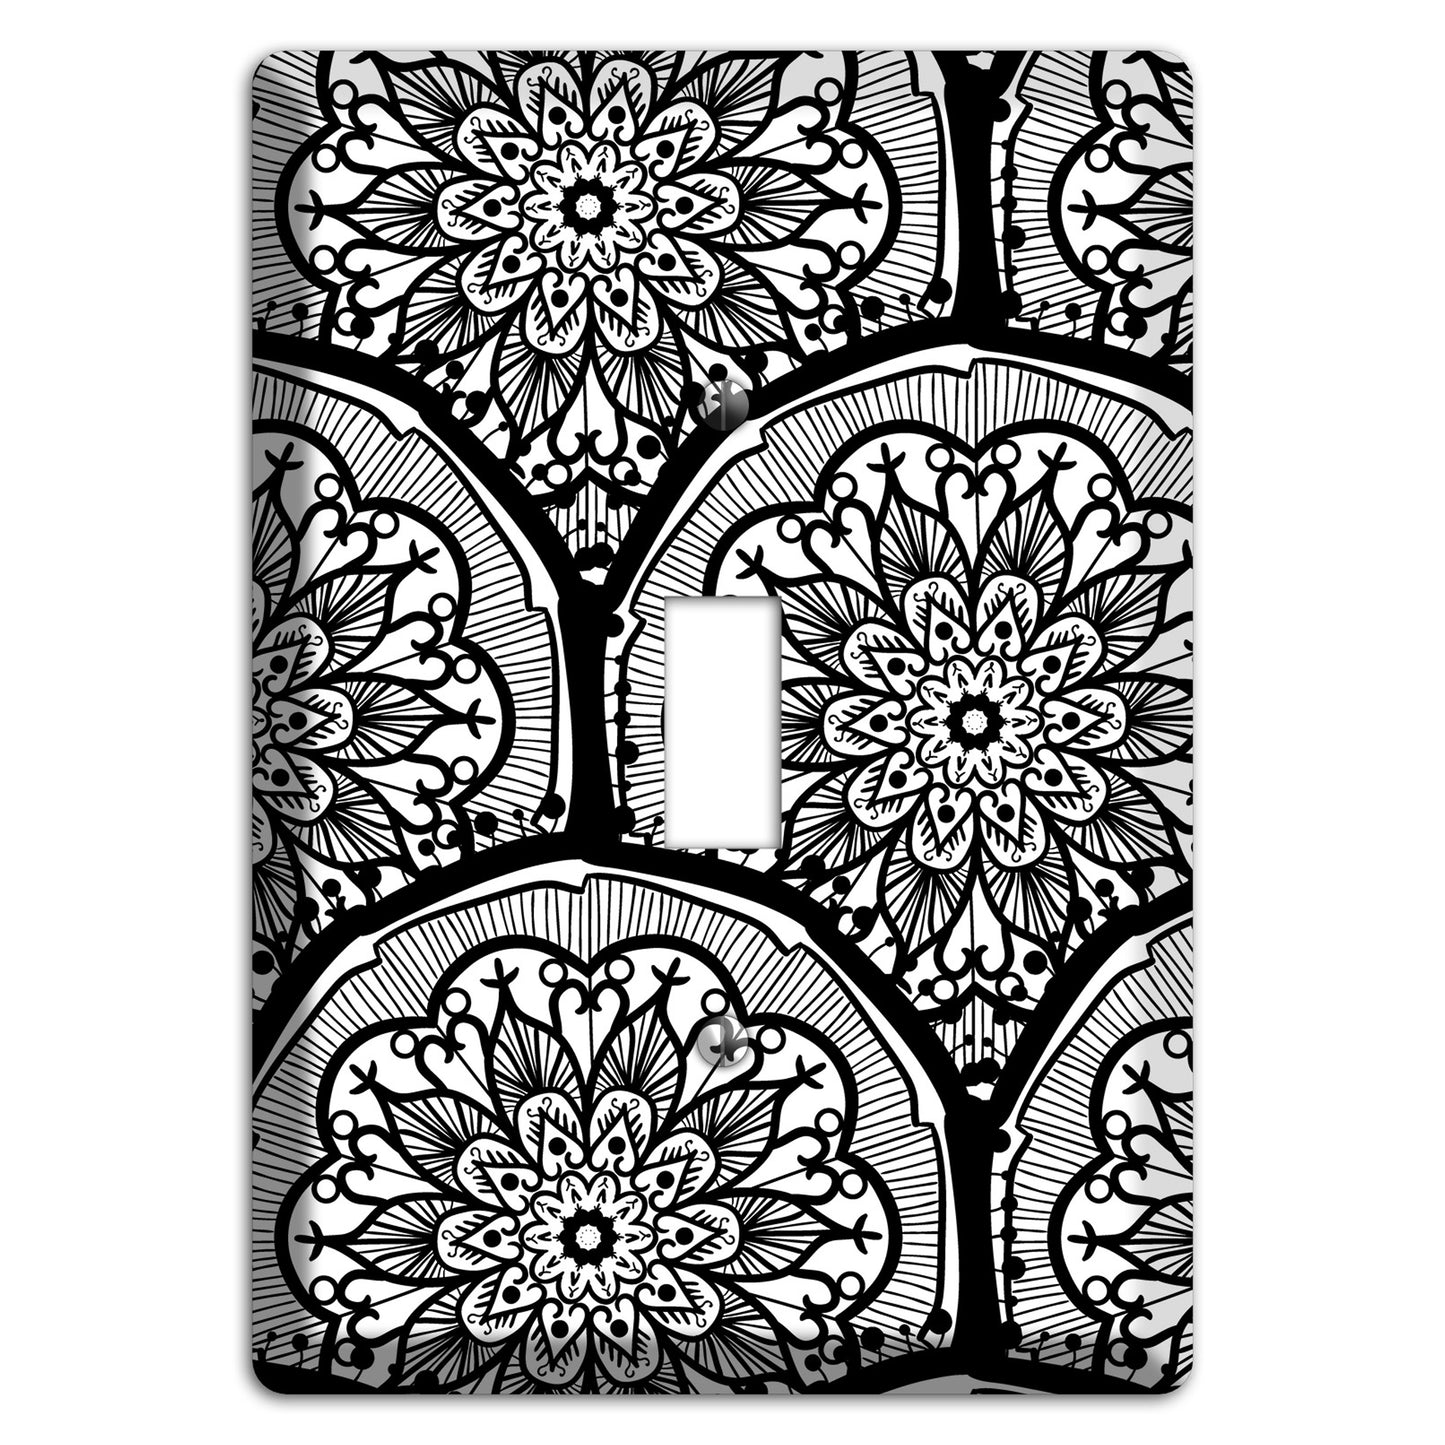 Mandala Black and White Style A Cover Plates Cover Plates